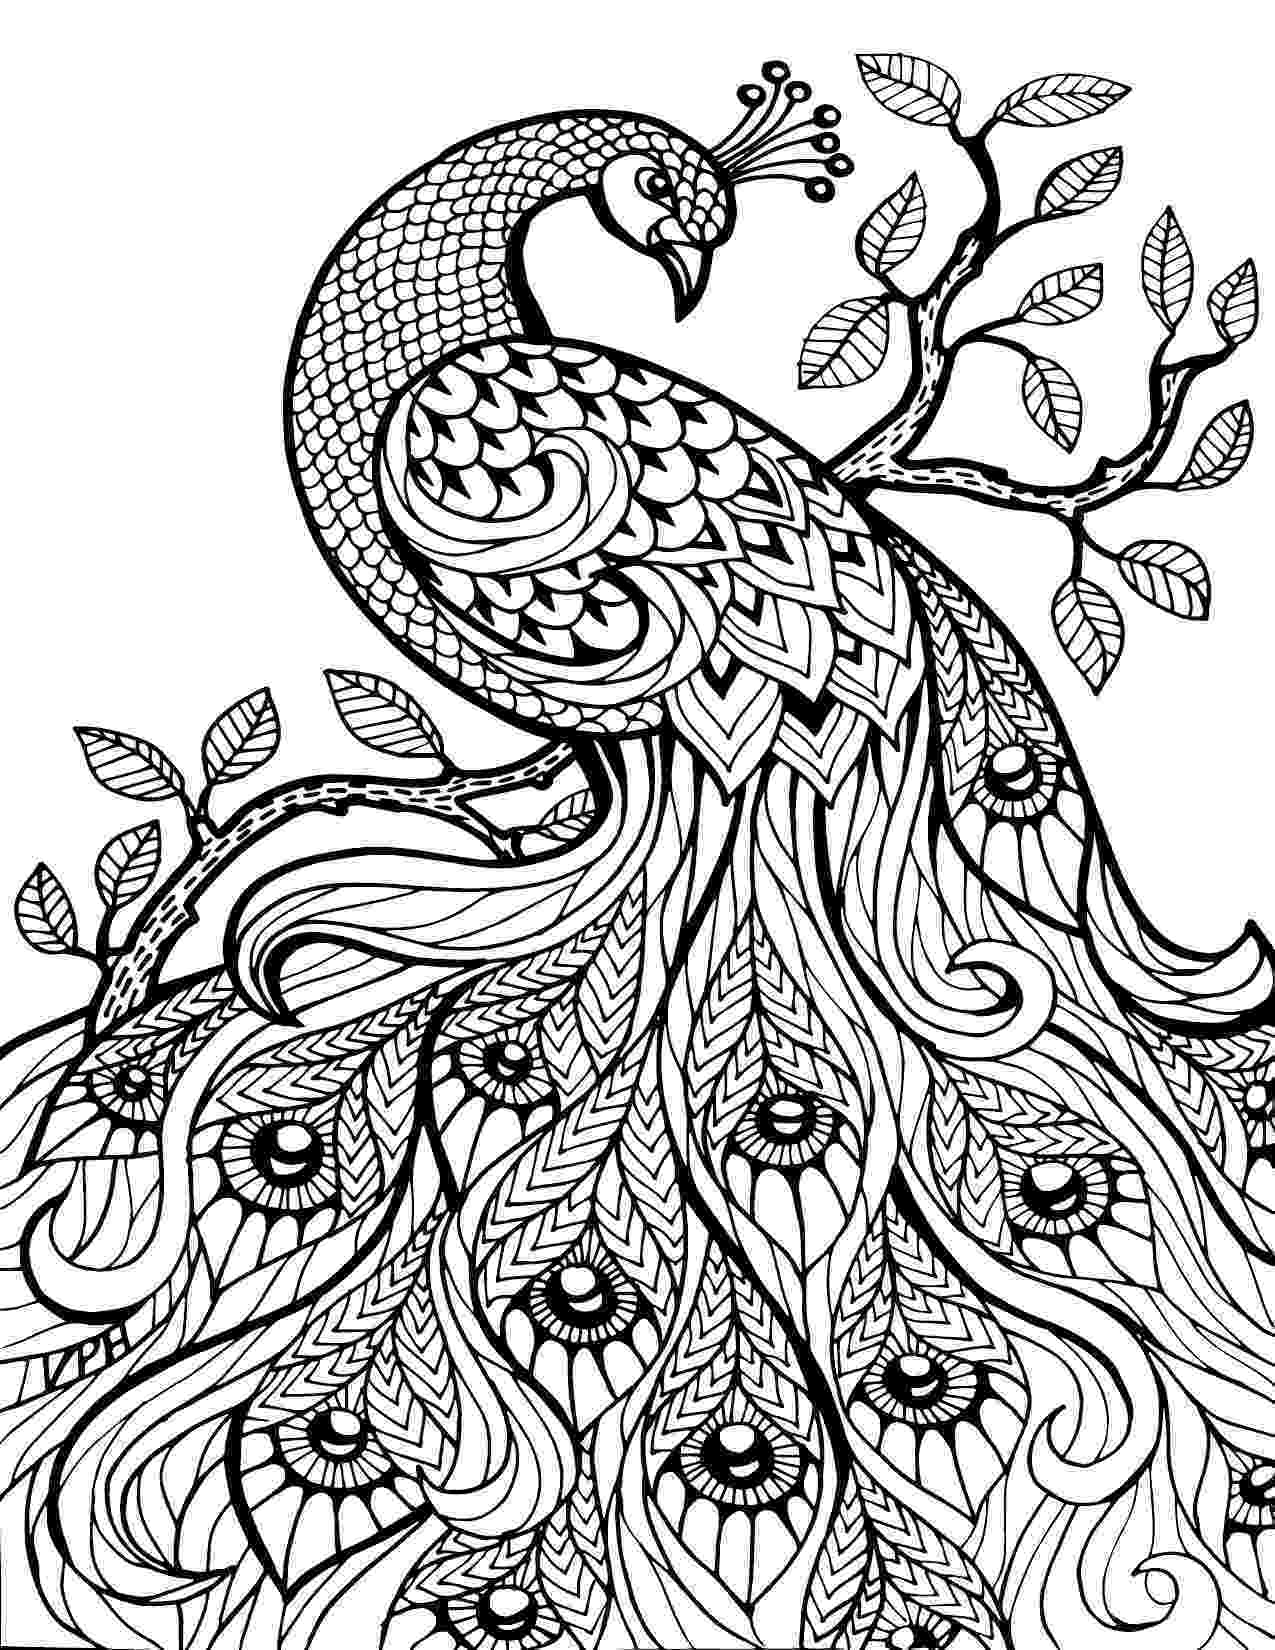 coloring book for grown ups free download free download adult coloring pages ups coloring download for book grown free 